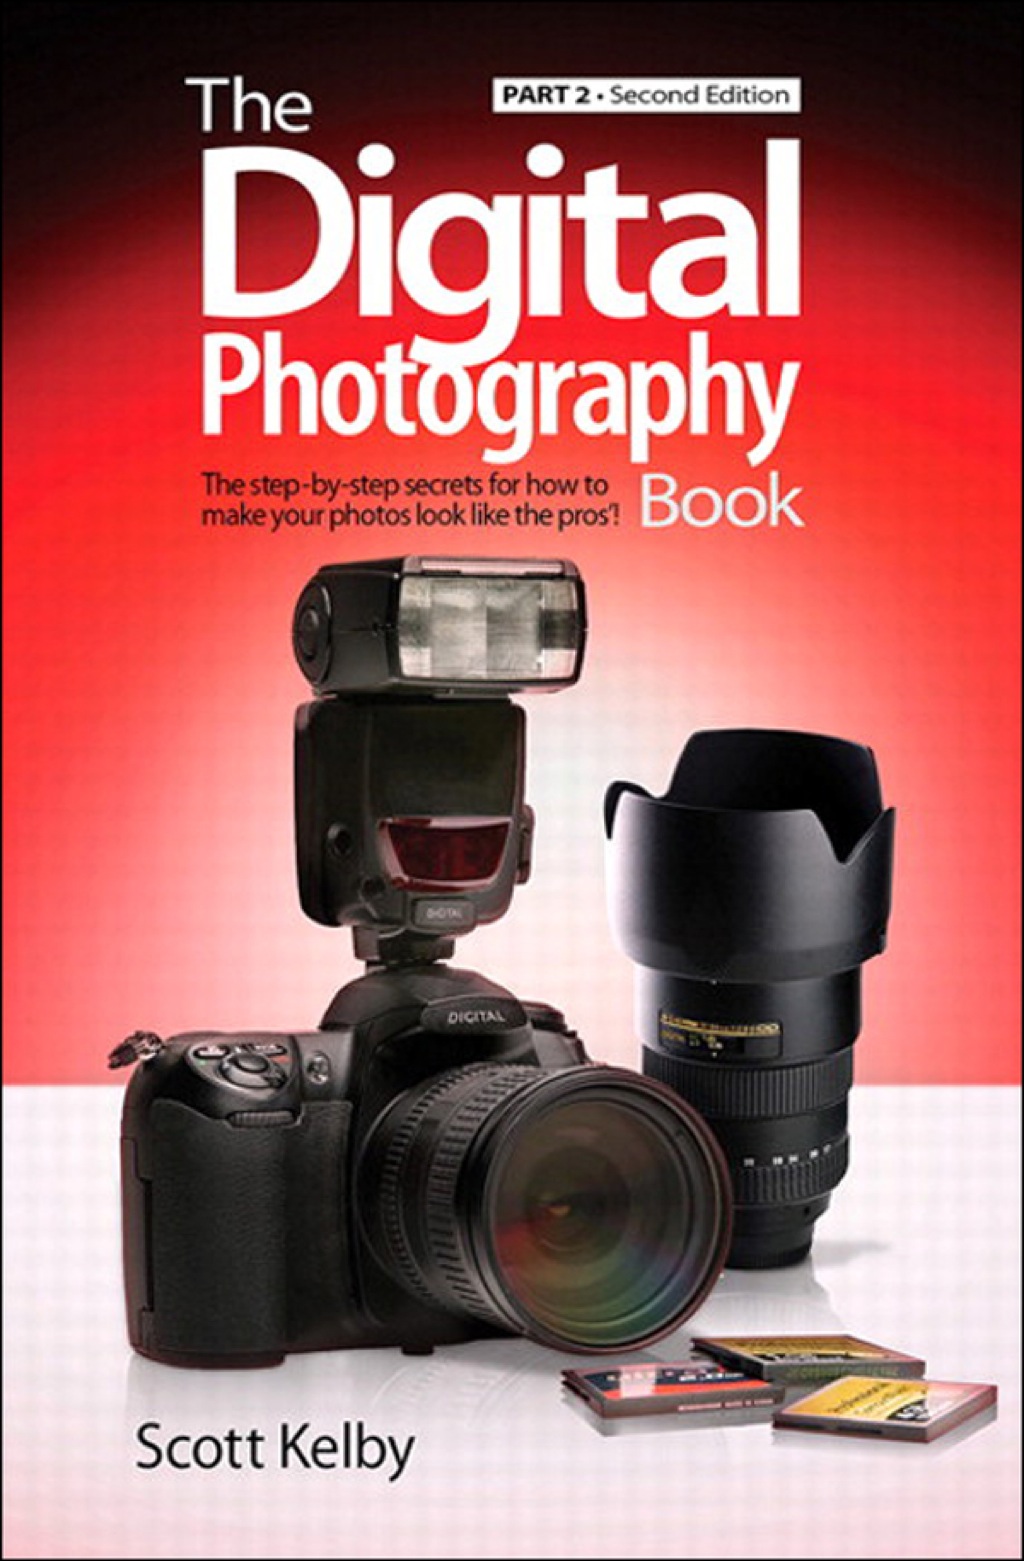 Digital Photography Book  Part 2  The - 2nd Edition (eBook)